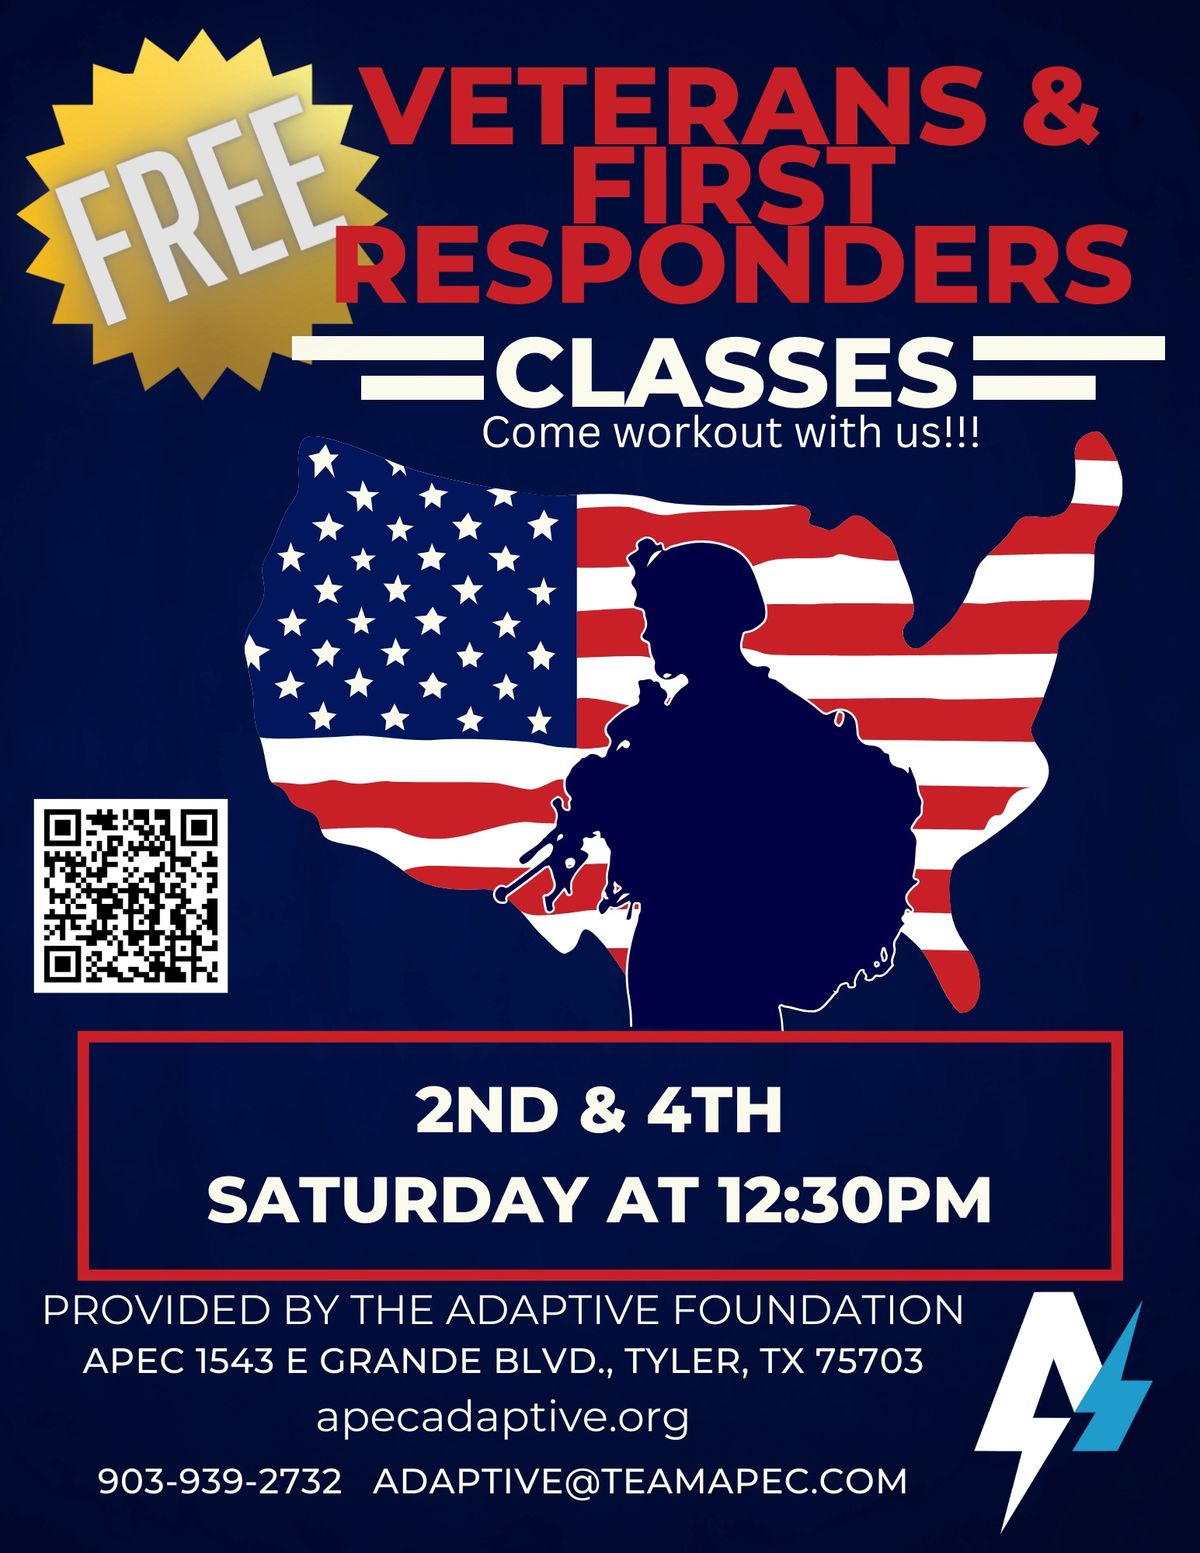 Veteran & First Responder Workouts Funded by The Adaptive Foundation